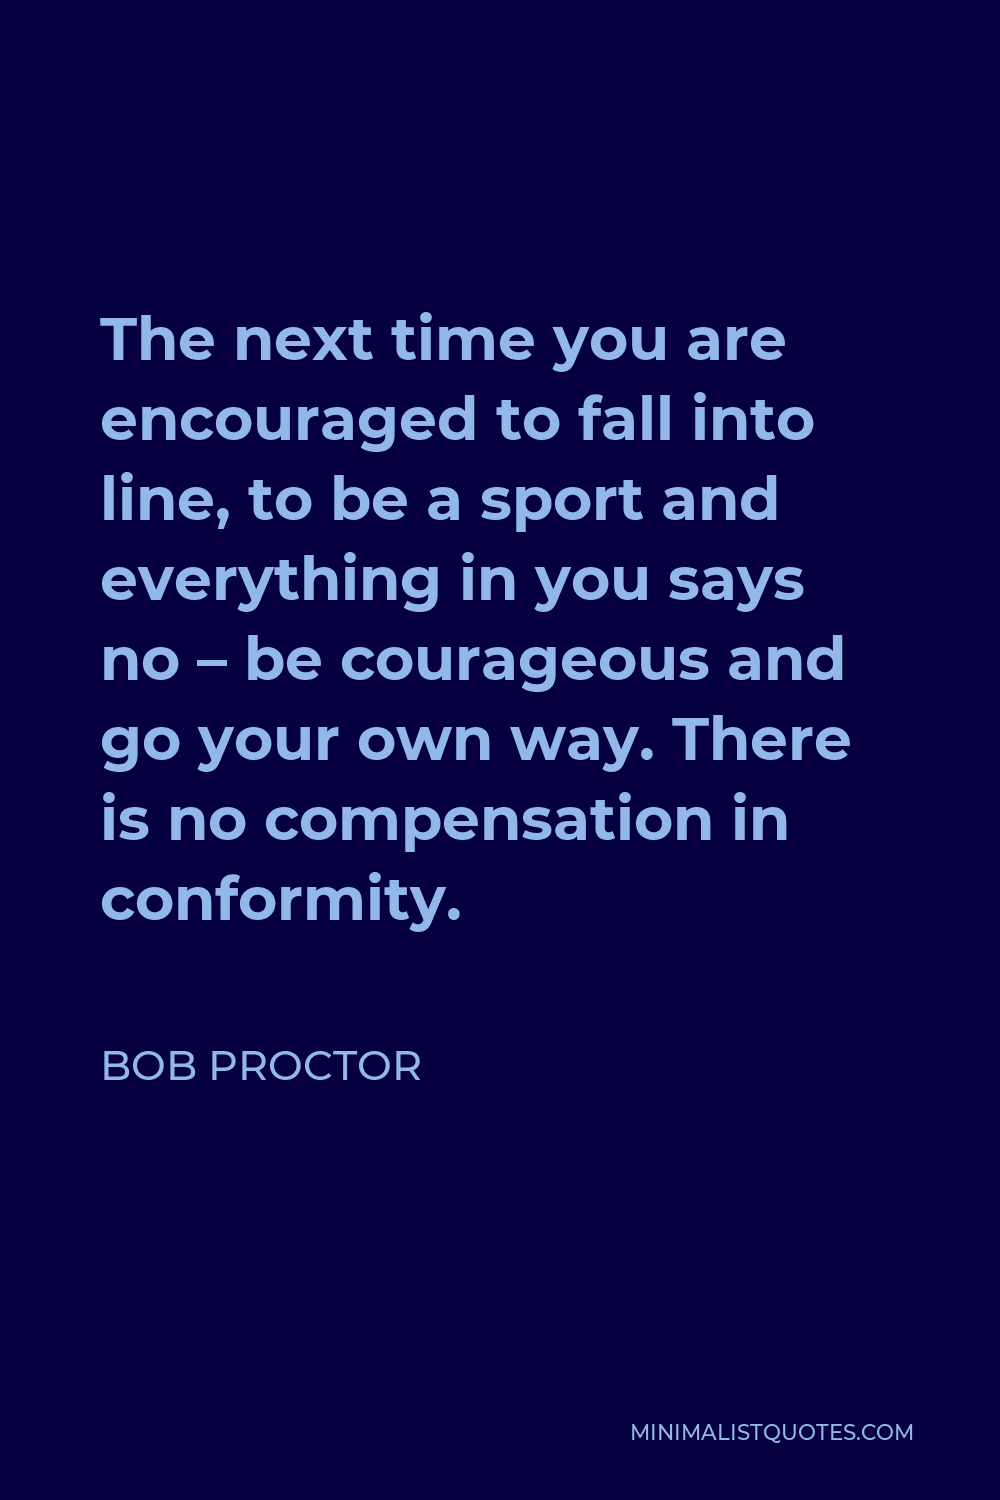 Bob Proctor Quote - The next time you are encouraged to fall into line, to be a sport and everything in you says no – be courageous and go your own way. There is no compensation in conformity.